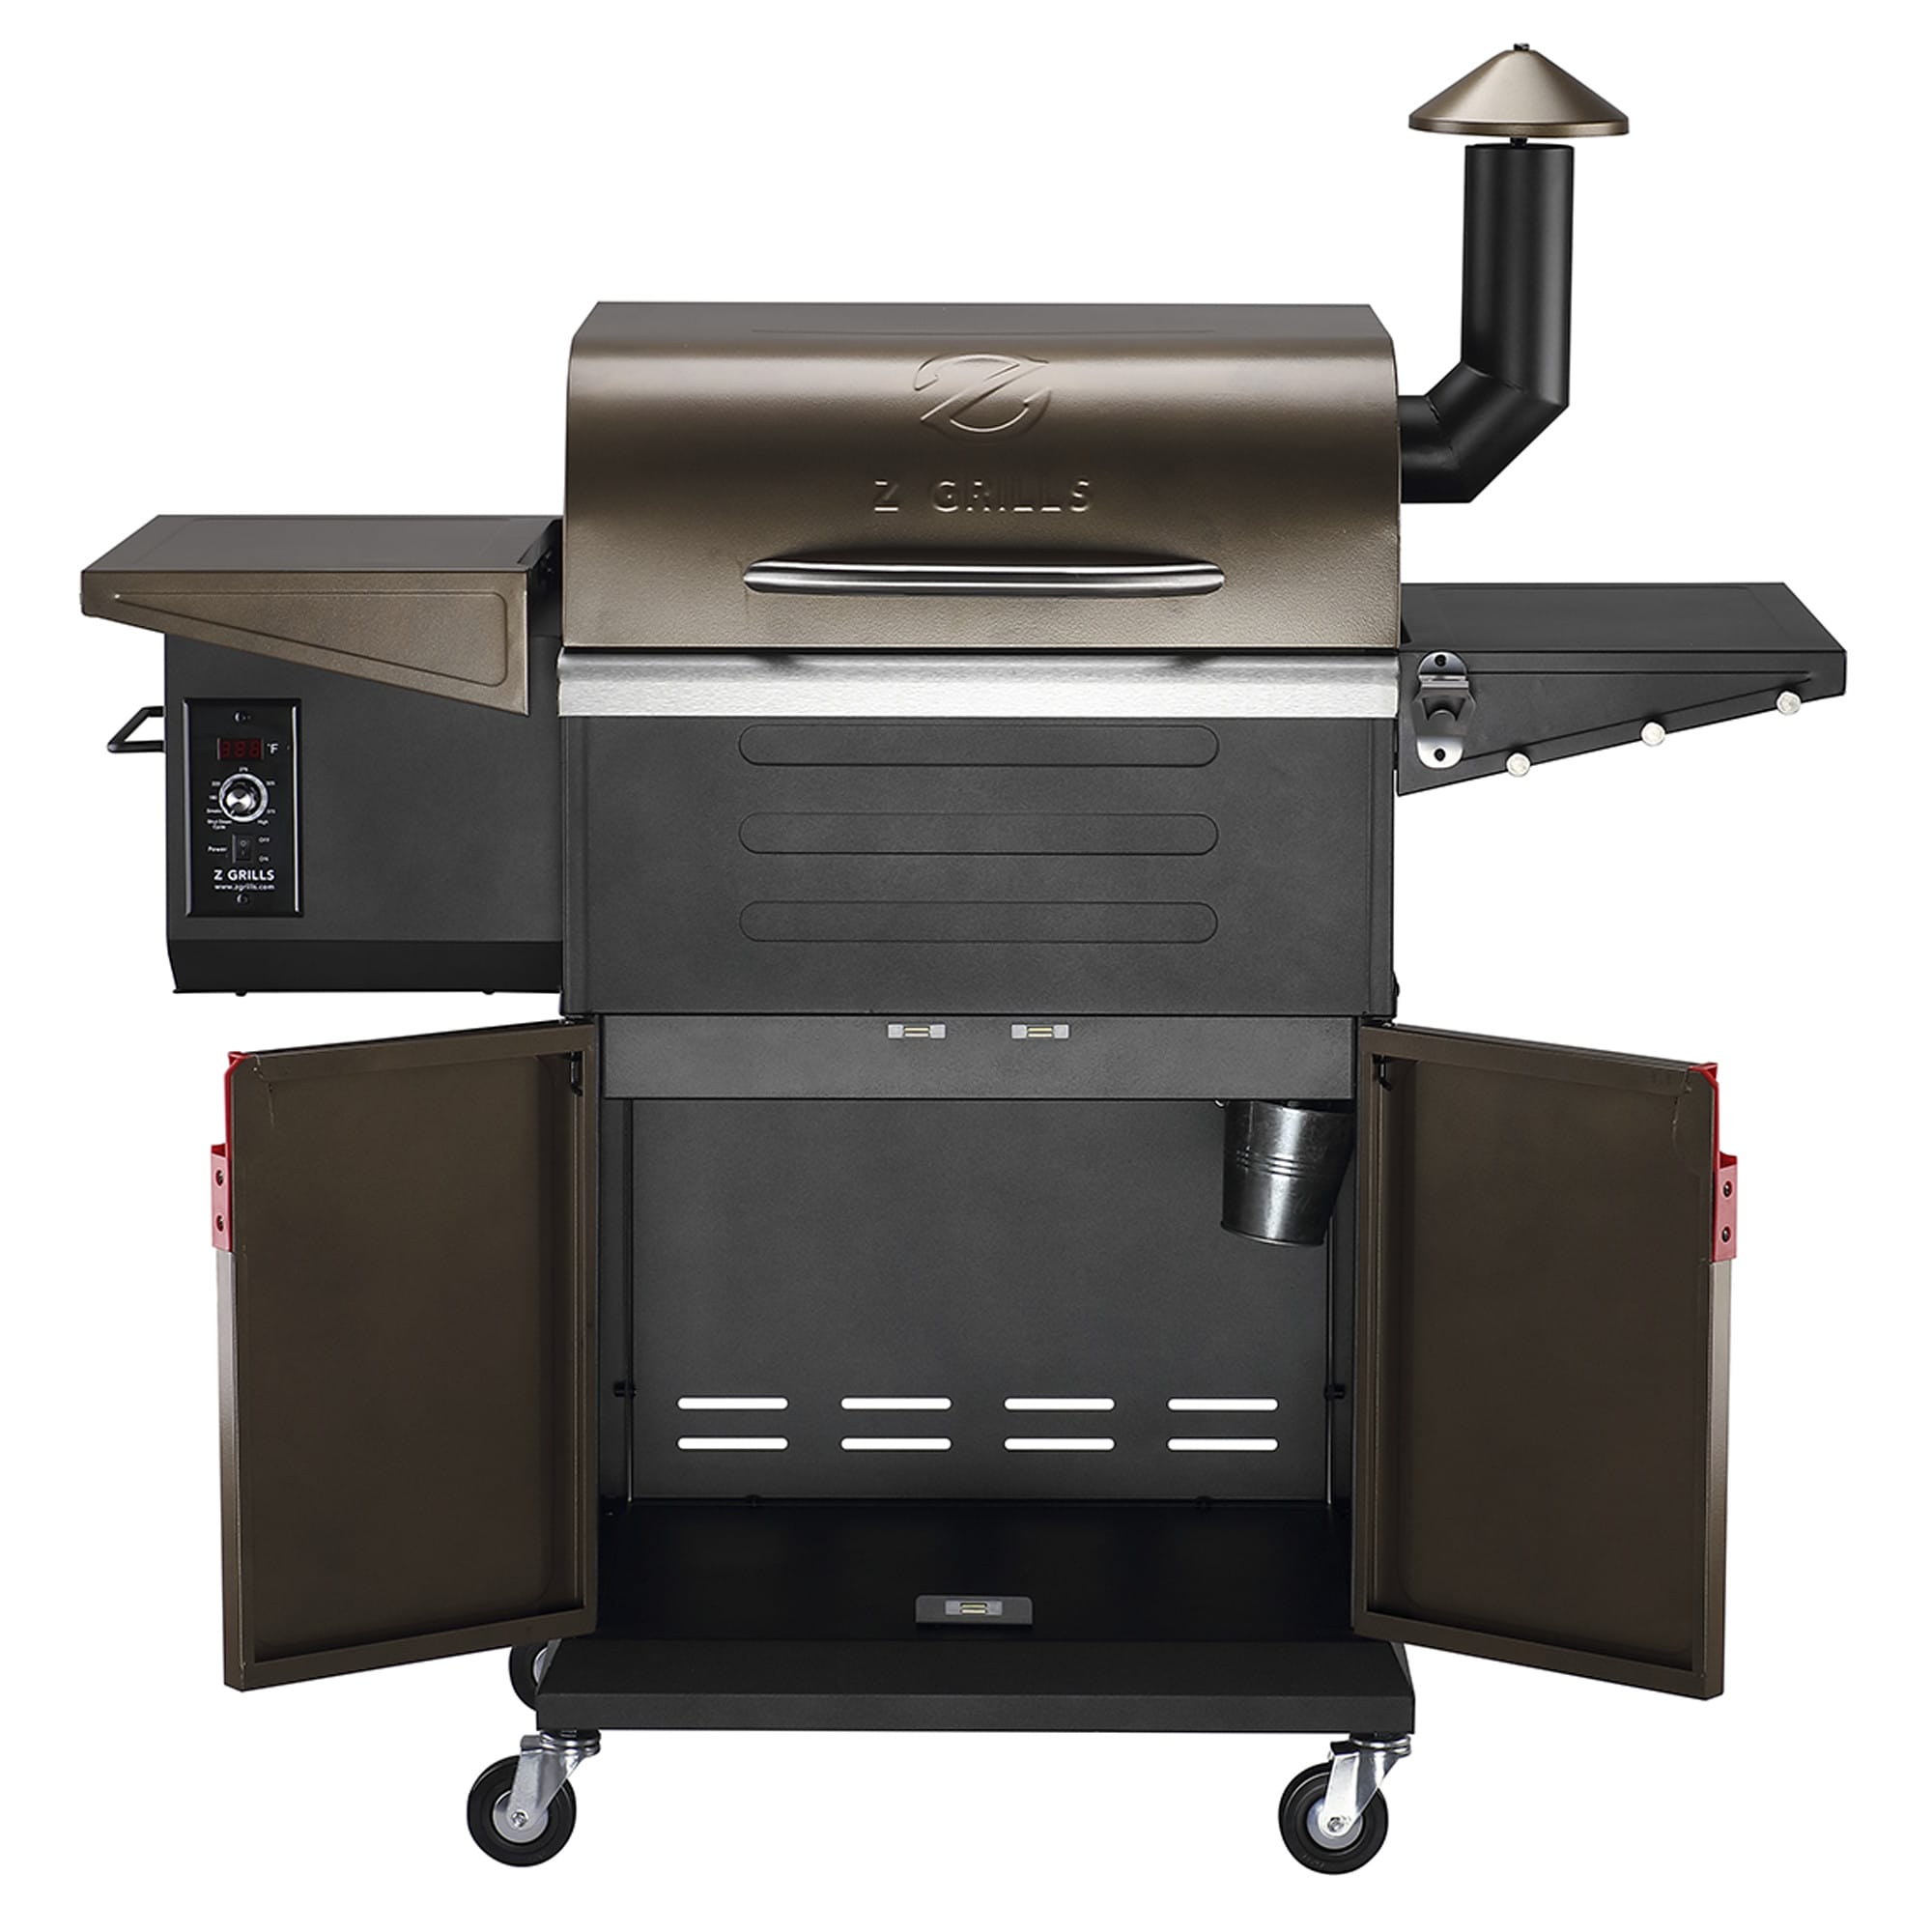 Z Grills Zpg-550b Wood Pellet Smoker Grill, Auto Temperature Control, 553 Sq in Cooking Area, 8 in 1 Grill for Outdoor BBQ, Black